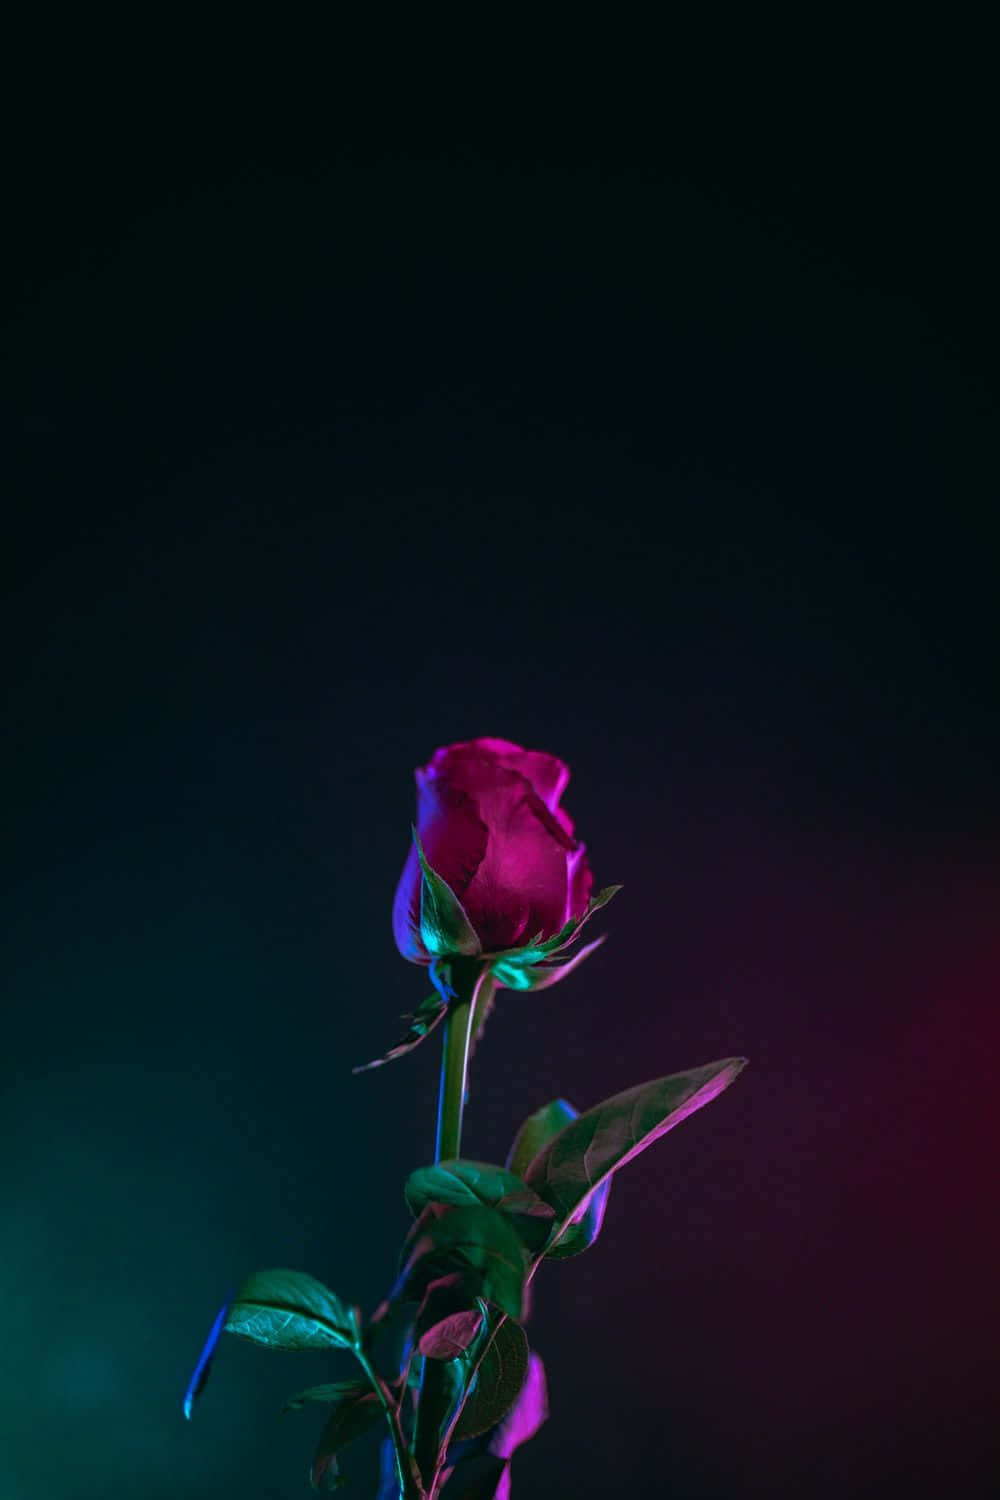 A Pink Rose In Front Of A Dark Background